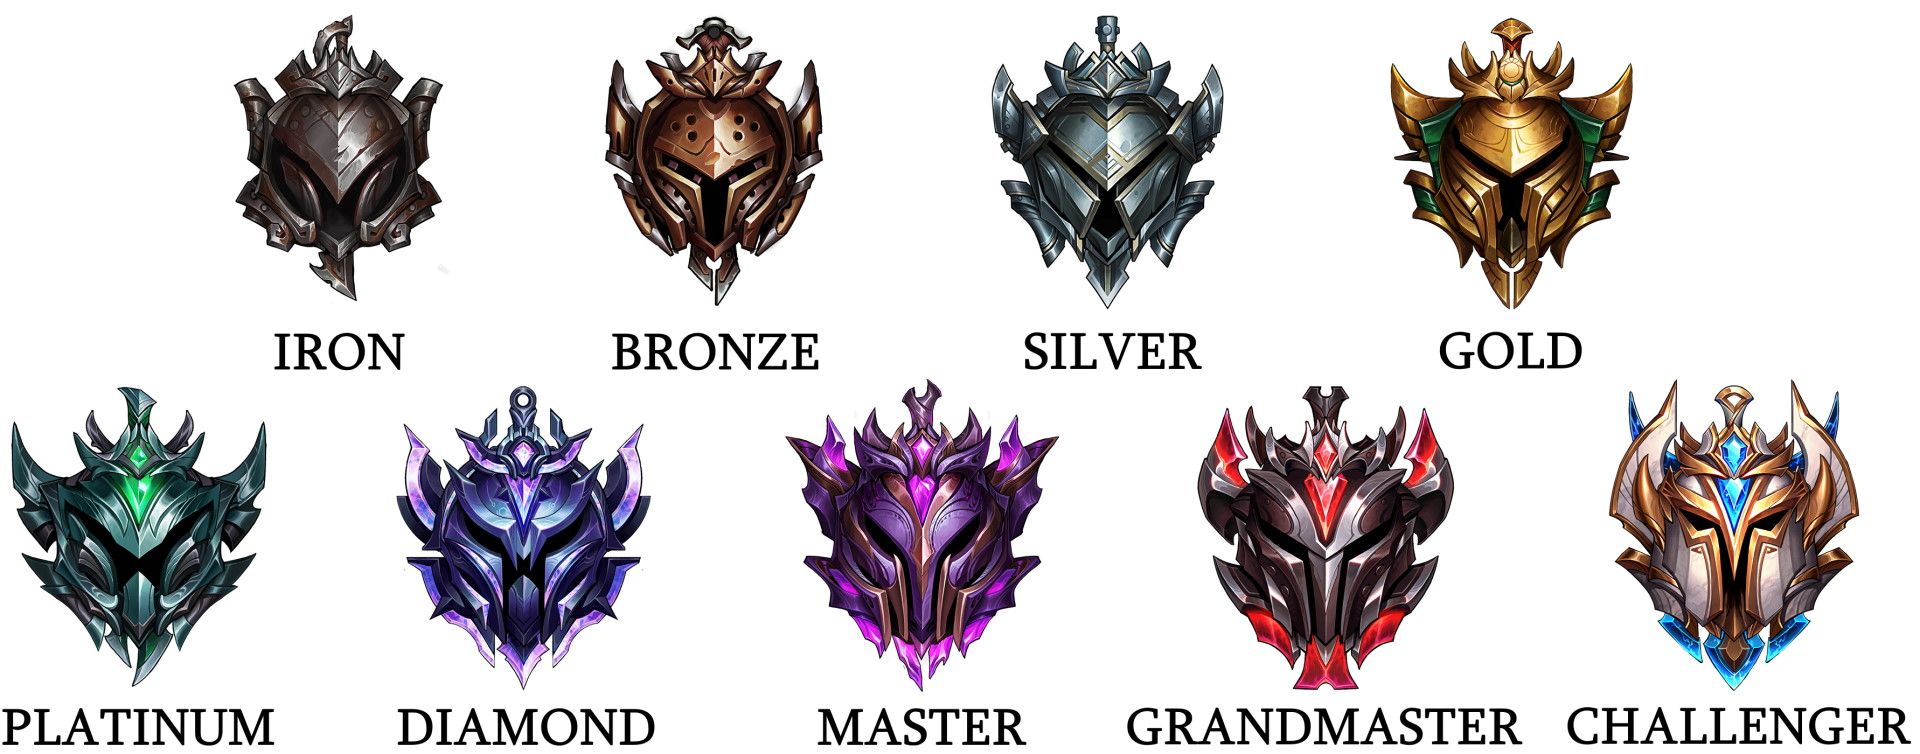 League Of Legends All Ranks And Ranked System Explained